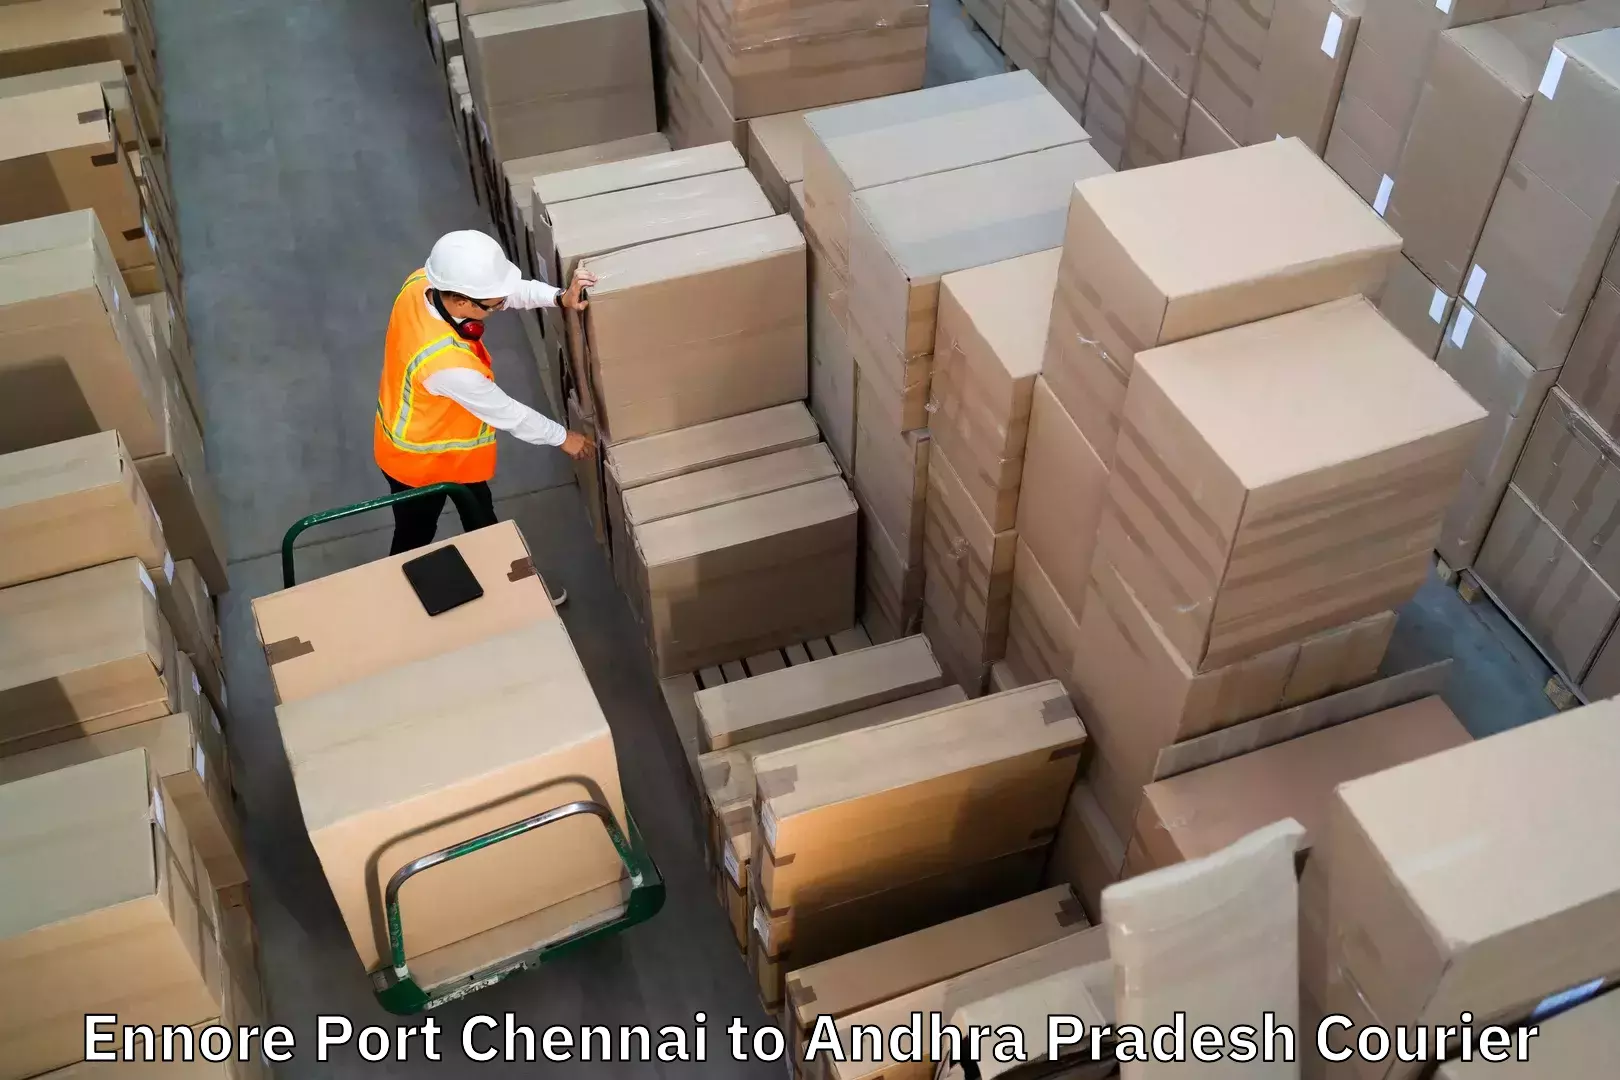 Baggage relocation service in Ennore Port Chennai to Kandukur